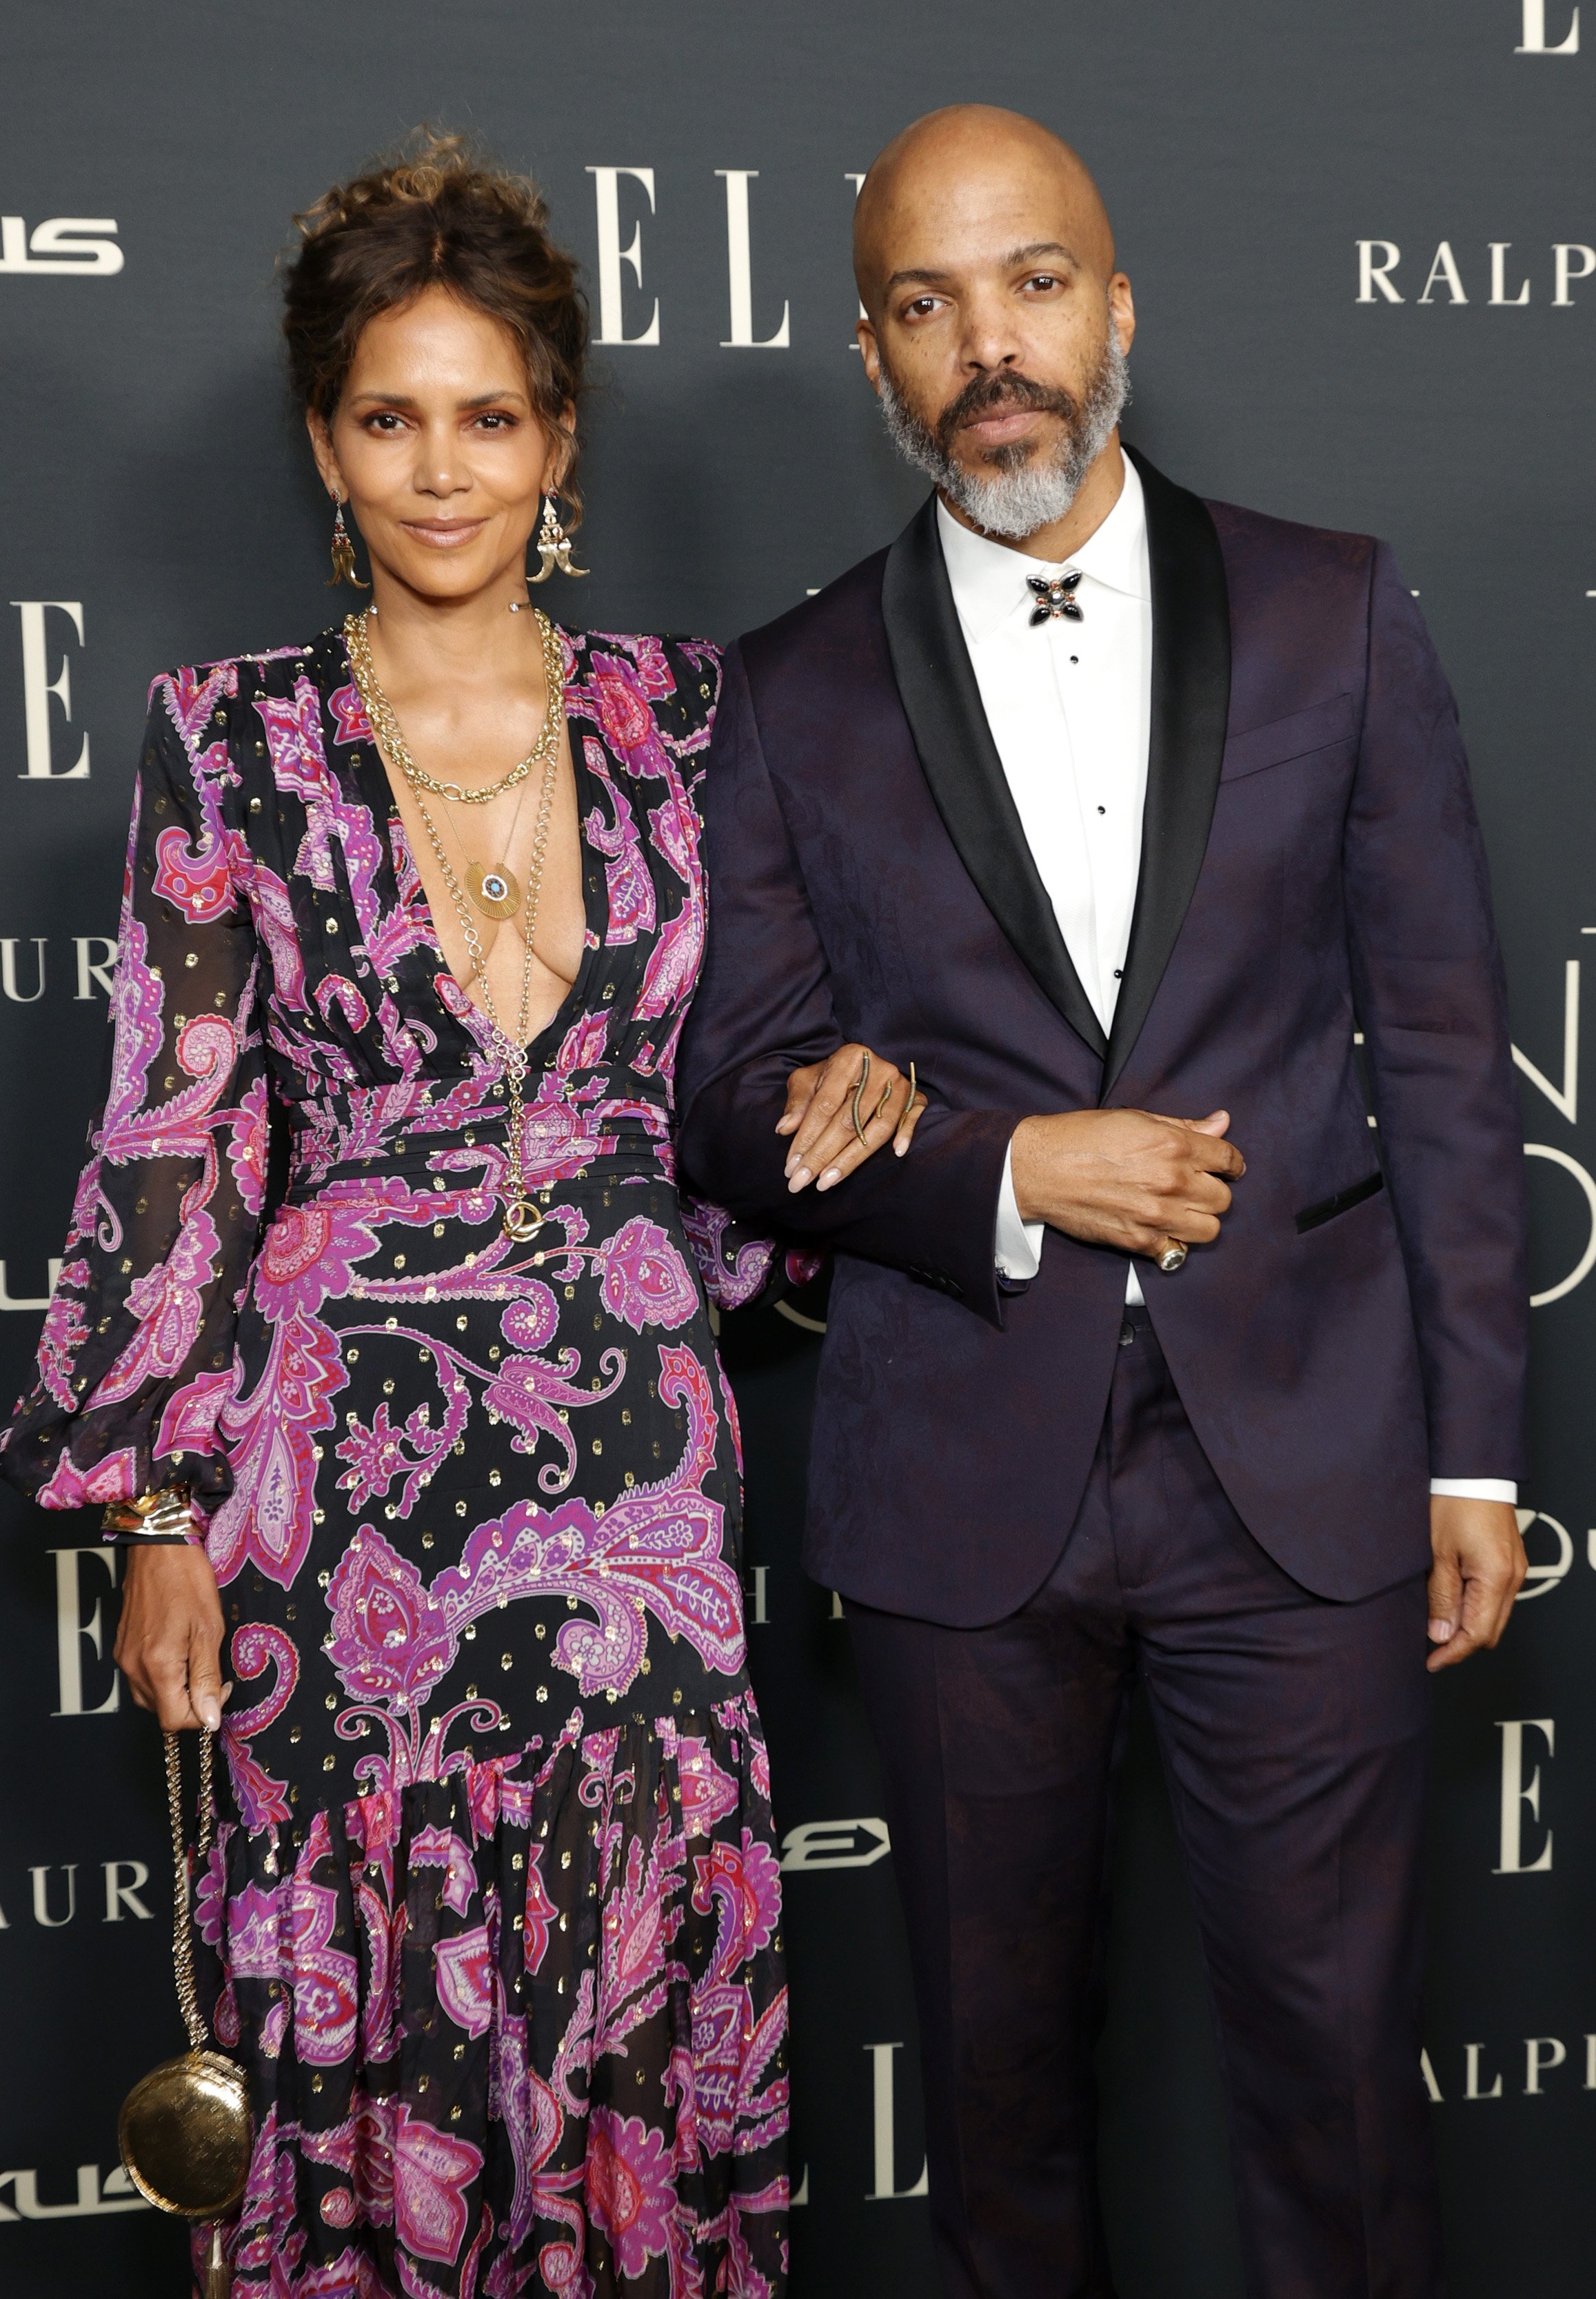 Halle Berry and Van Hunt pictured at the 27th Annual ELLE Women in Hollywood Celebration at Dolby Terrace, 2021, Los Angeles, California. | Photo: Getty Images